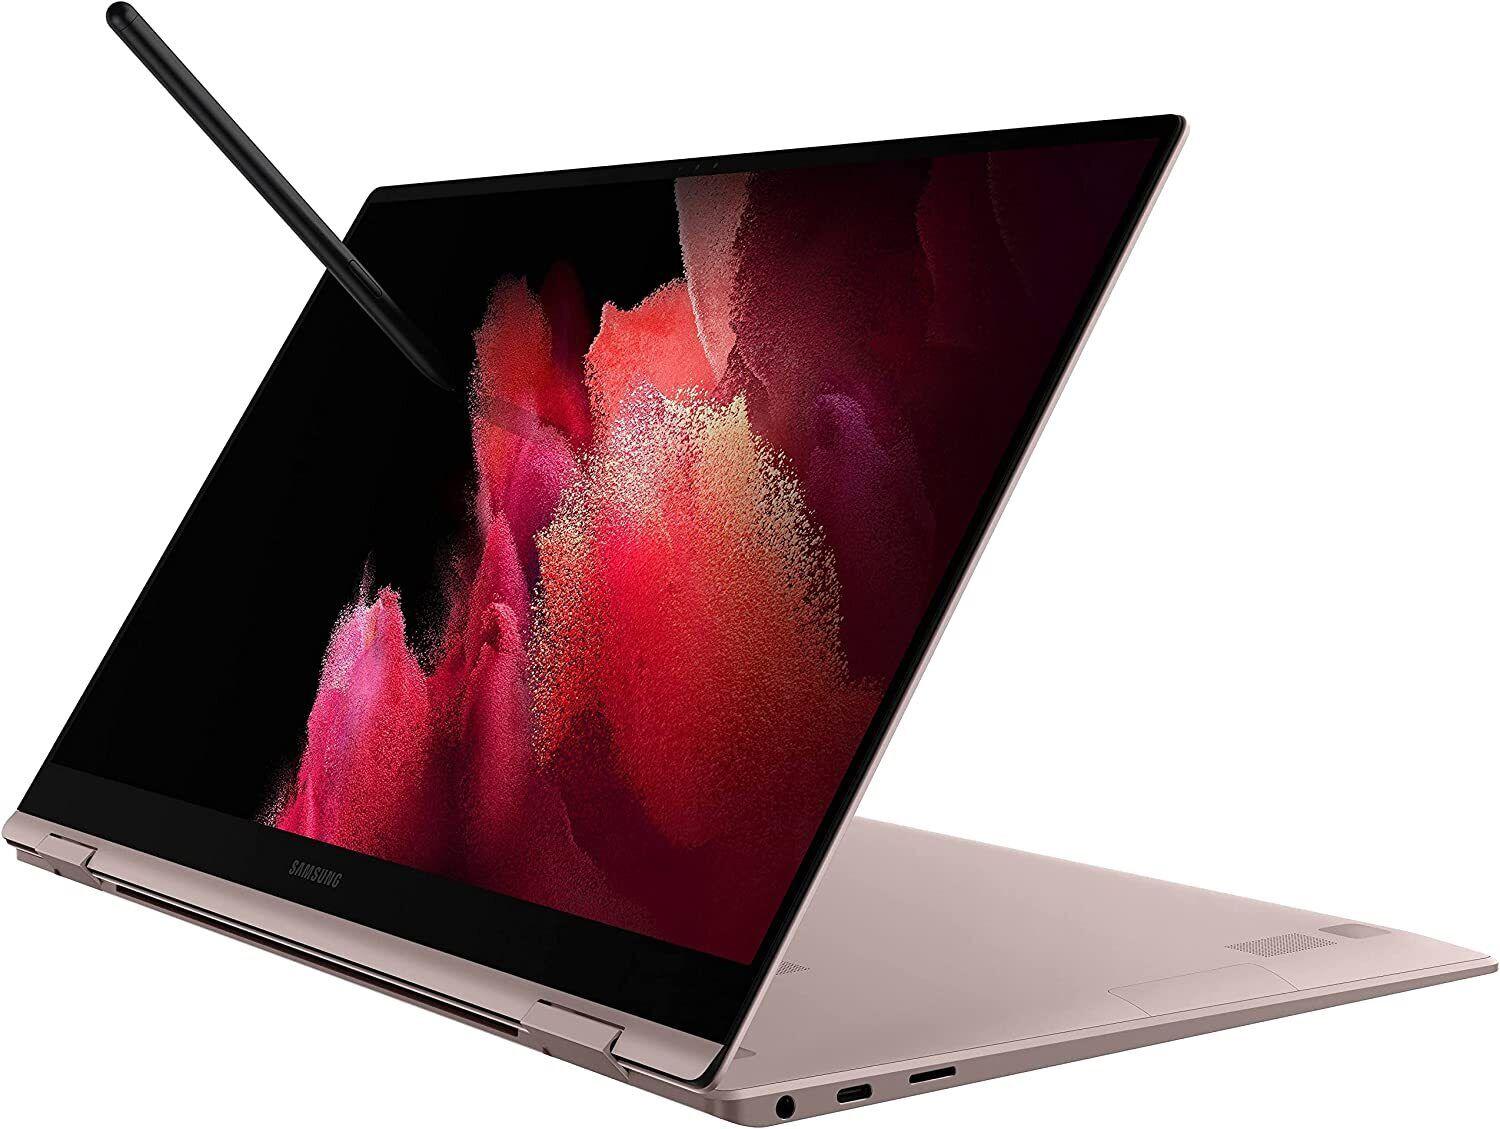 Samsung Galaxy Book Pro 360 15.6in 2-in-1 i7 8GB 512GB Laptop for $599.99 Shipped